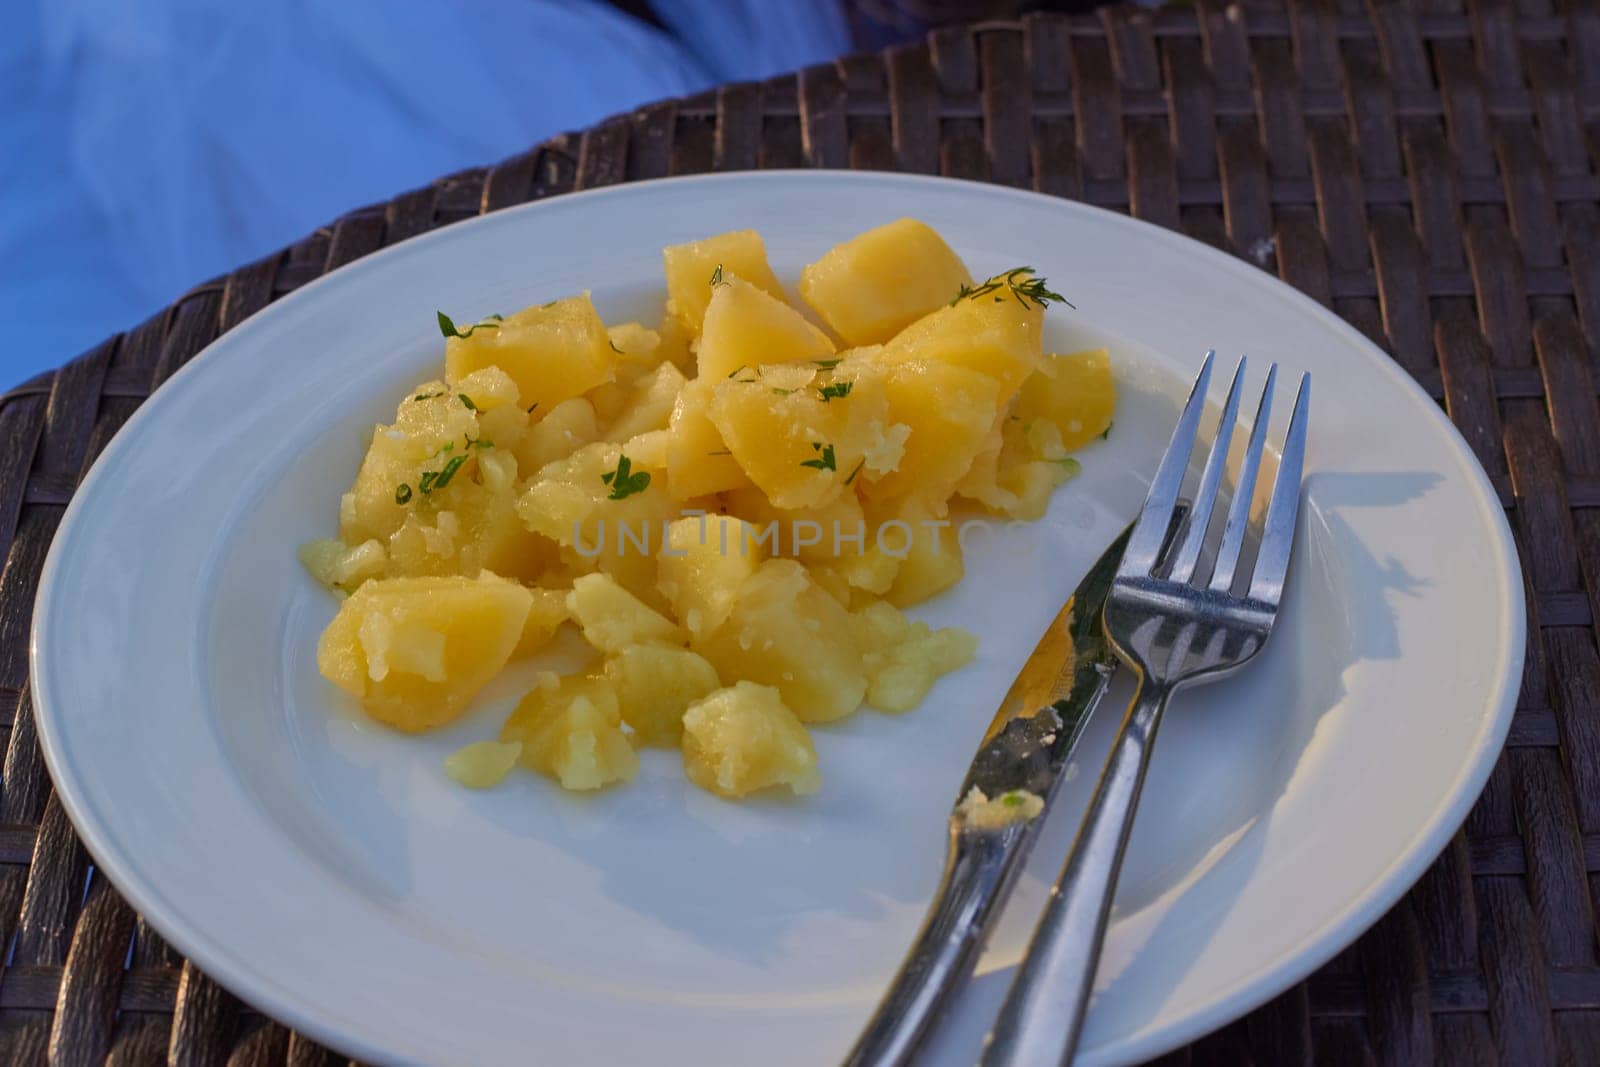 Photo fried potatoes with dill on a white plate. Metal fork and knife. Table setting. Serving lunch. Food.